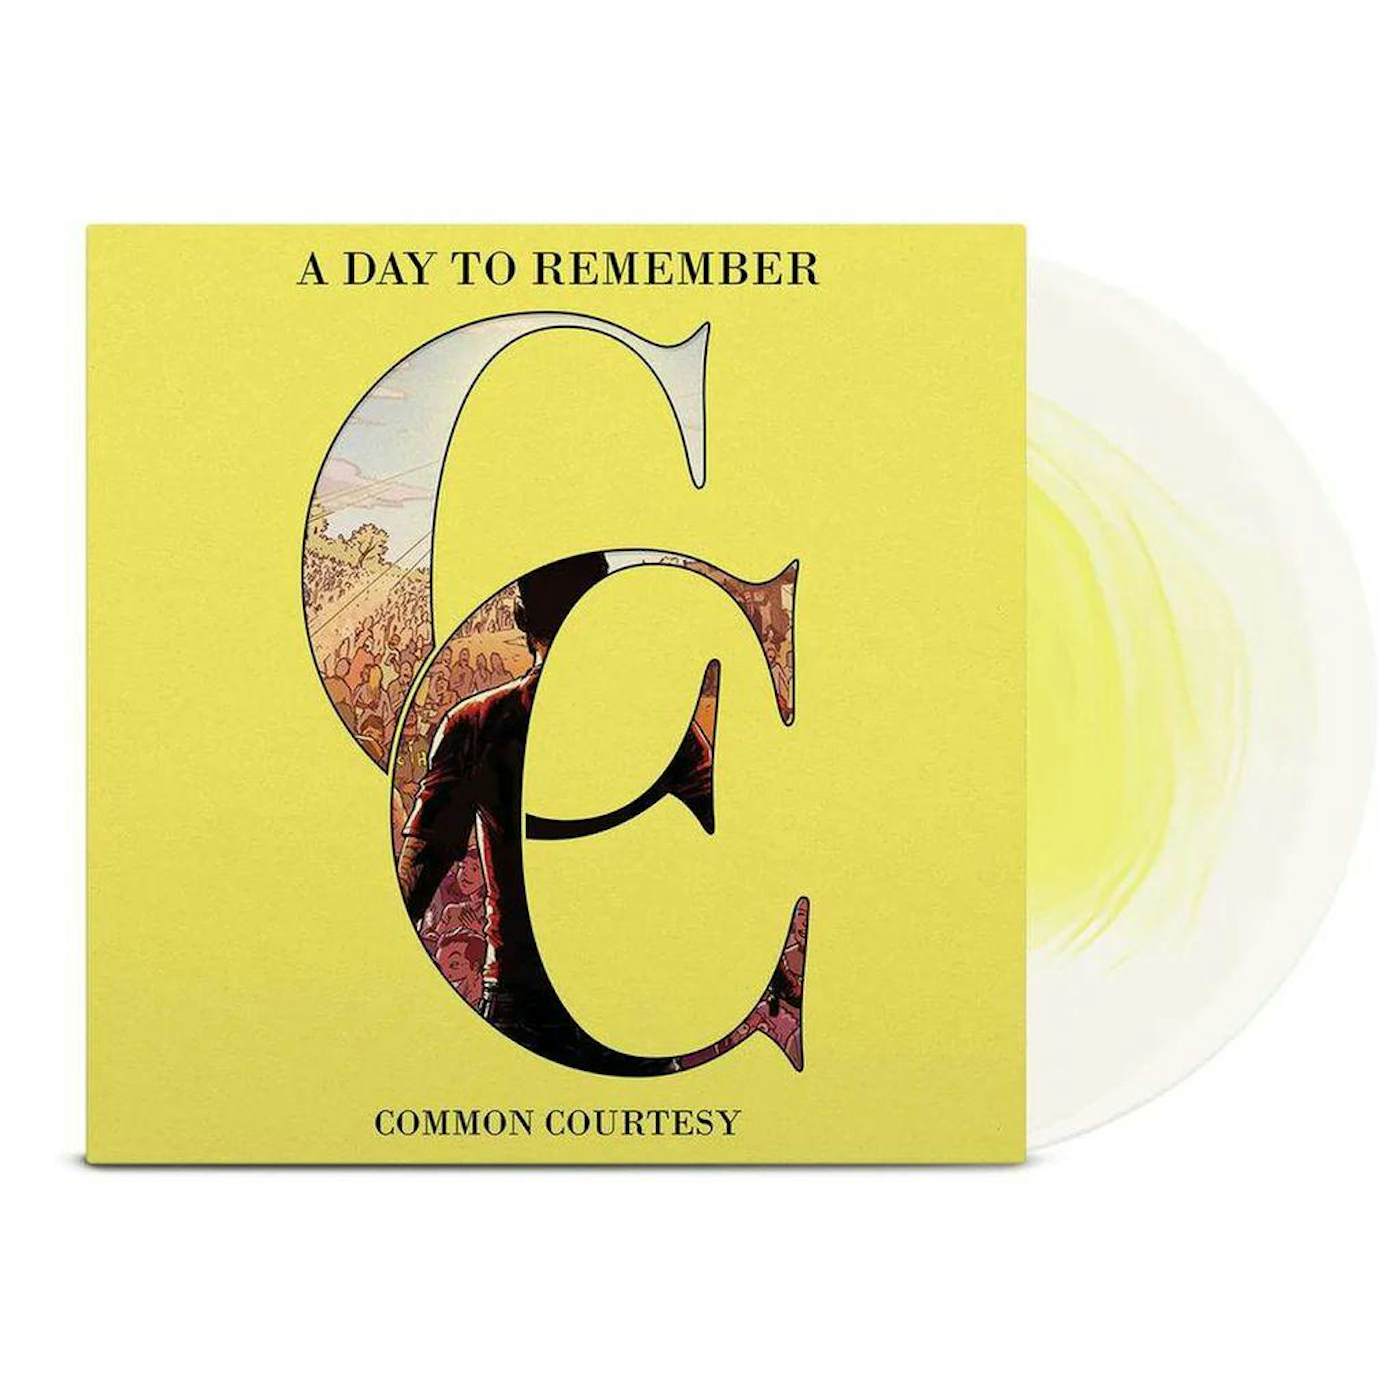 A Day To Remember COMMON COURTESY (LEMON & MILKY CLEAR VINYL) Vinyl Record